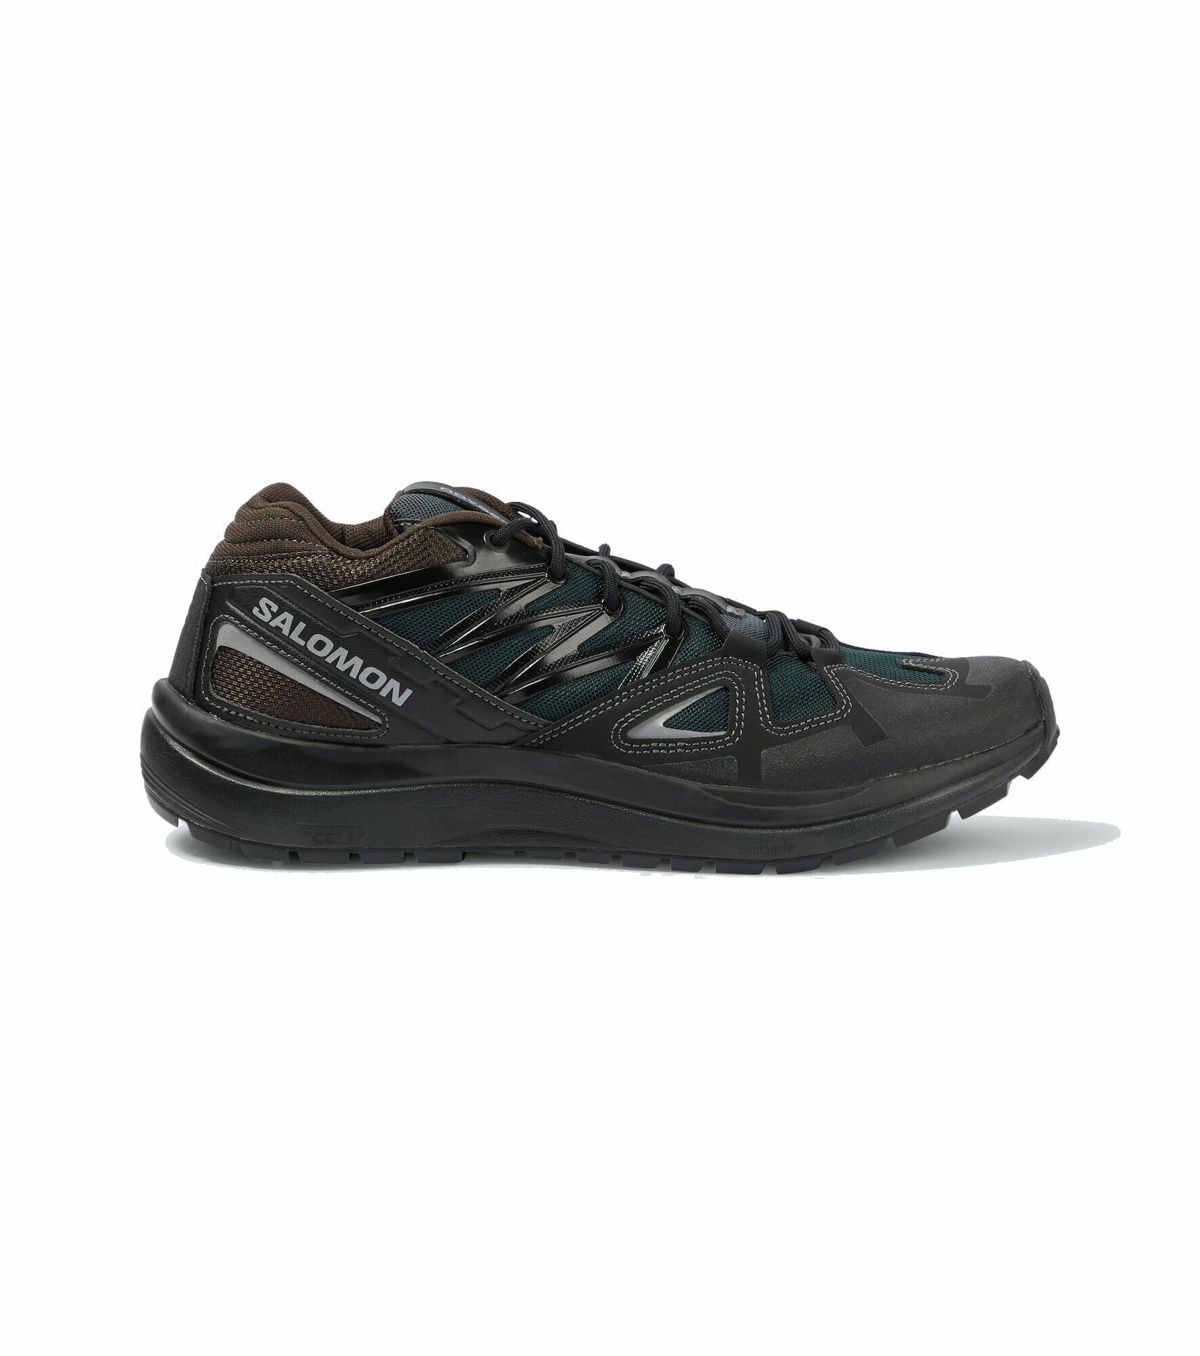 And Wander x Salomon Odyssey Sneakers in Black and Wander